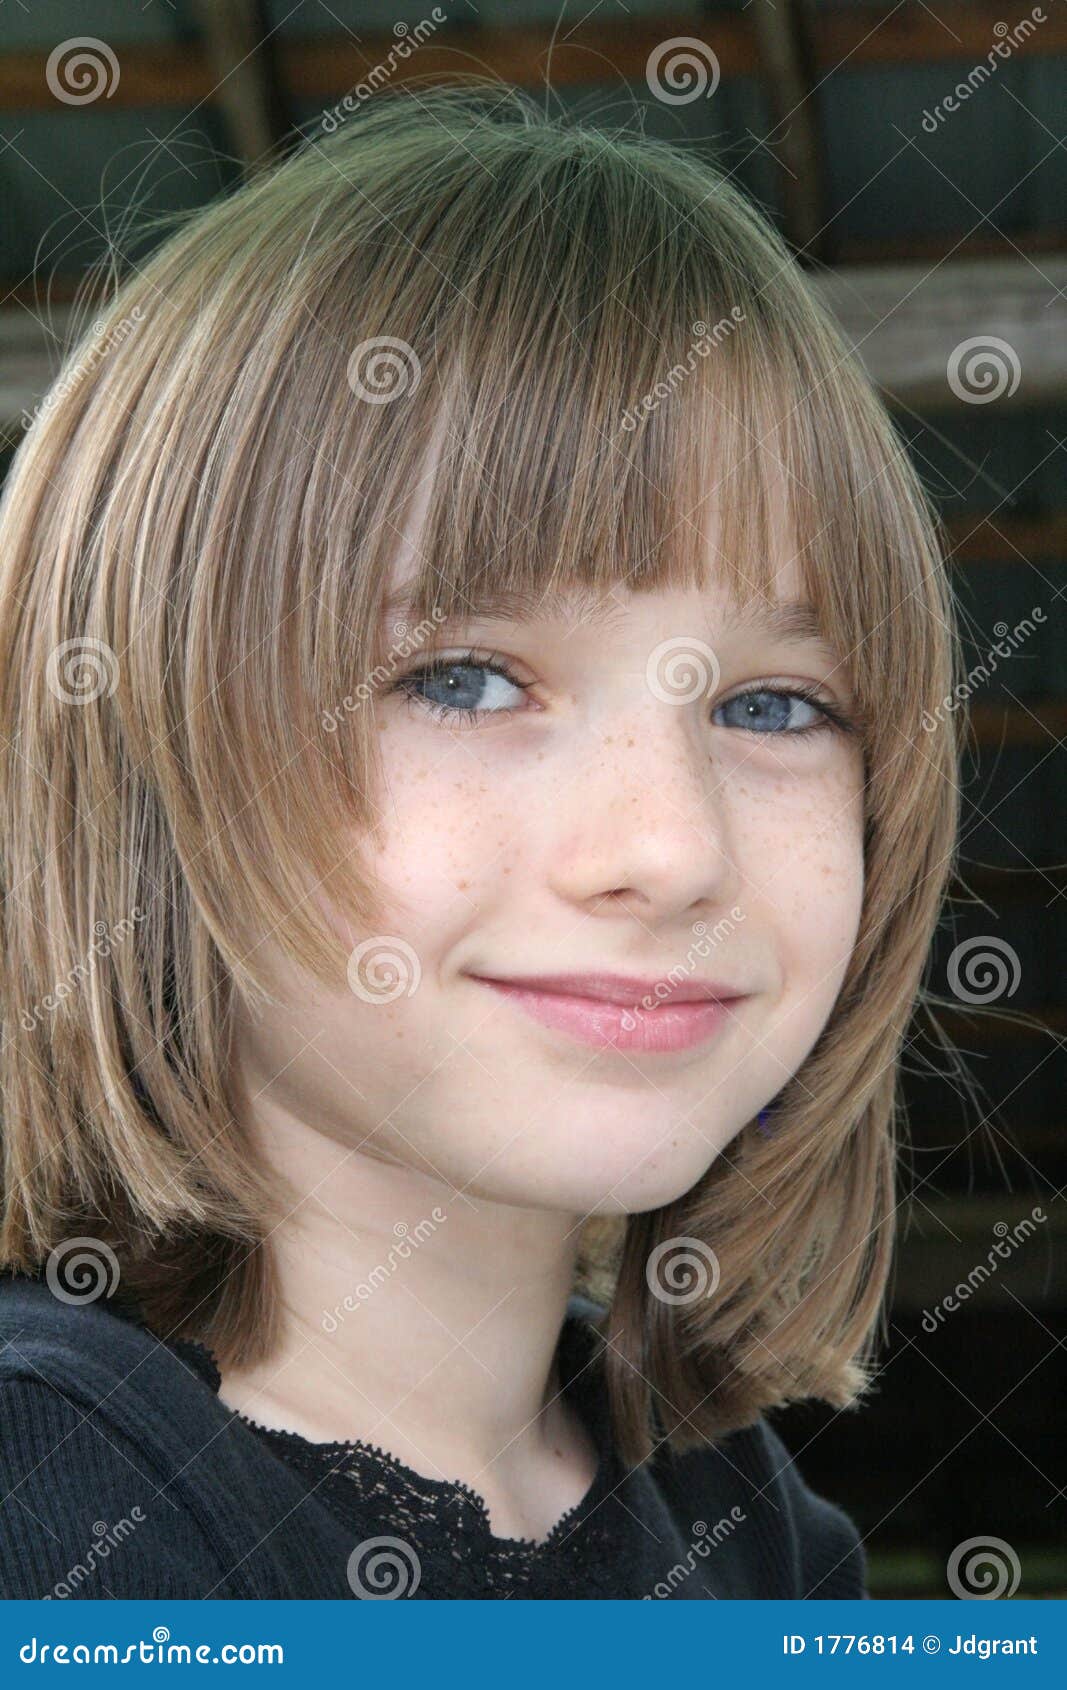 little girl with freckles